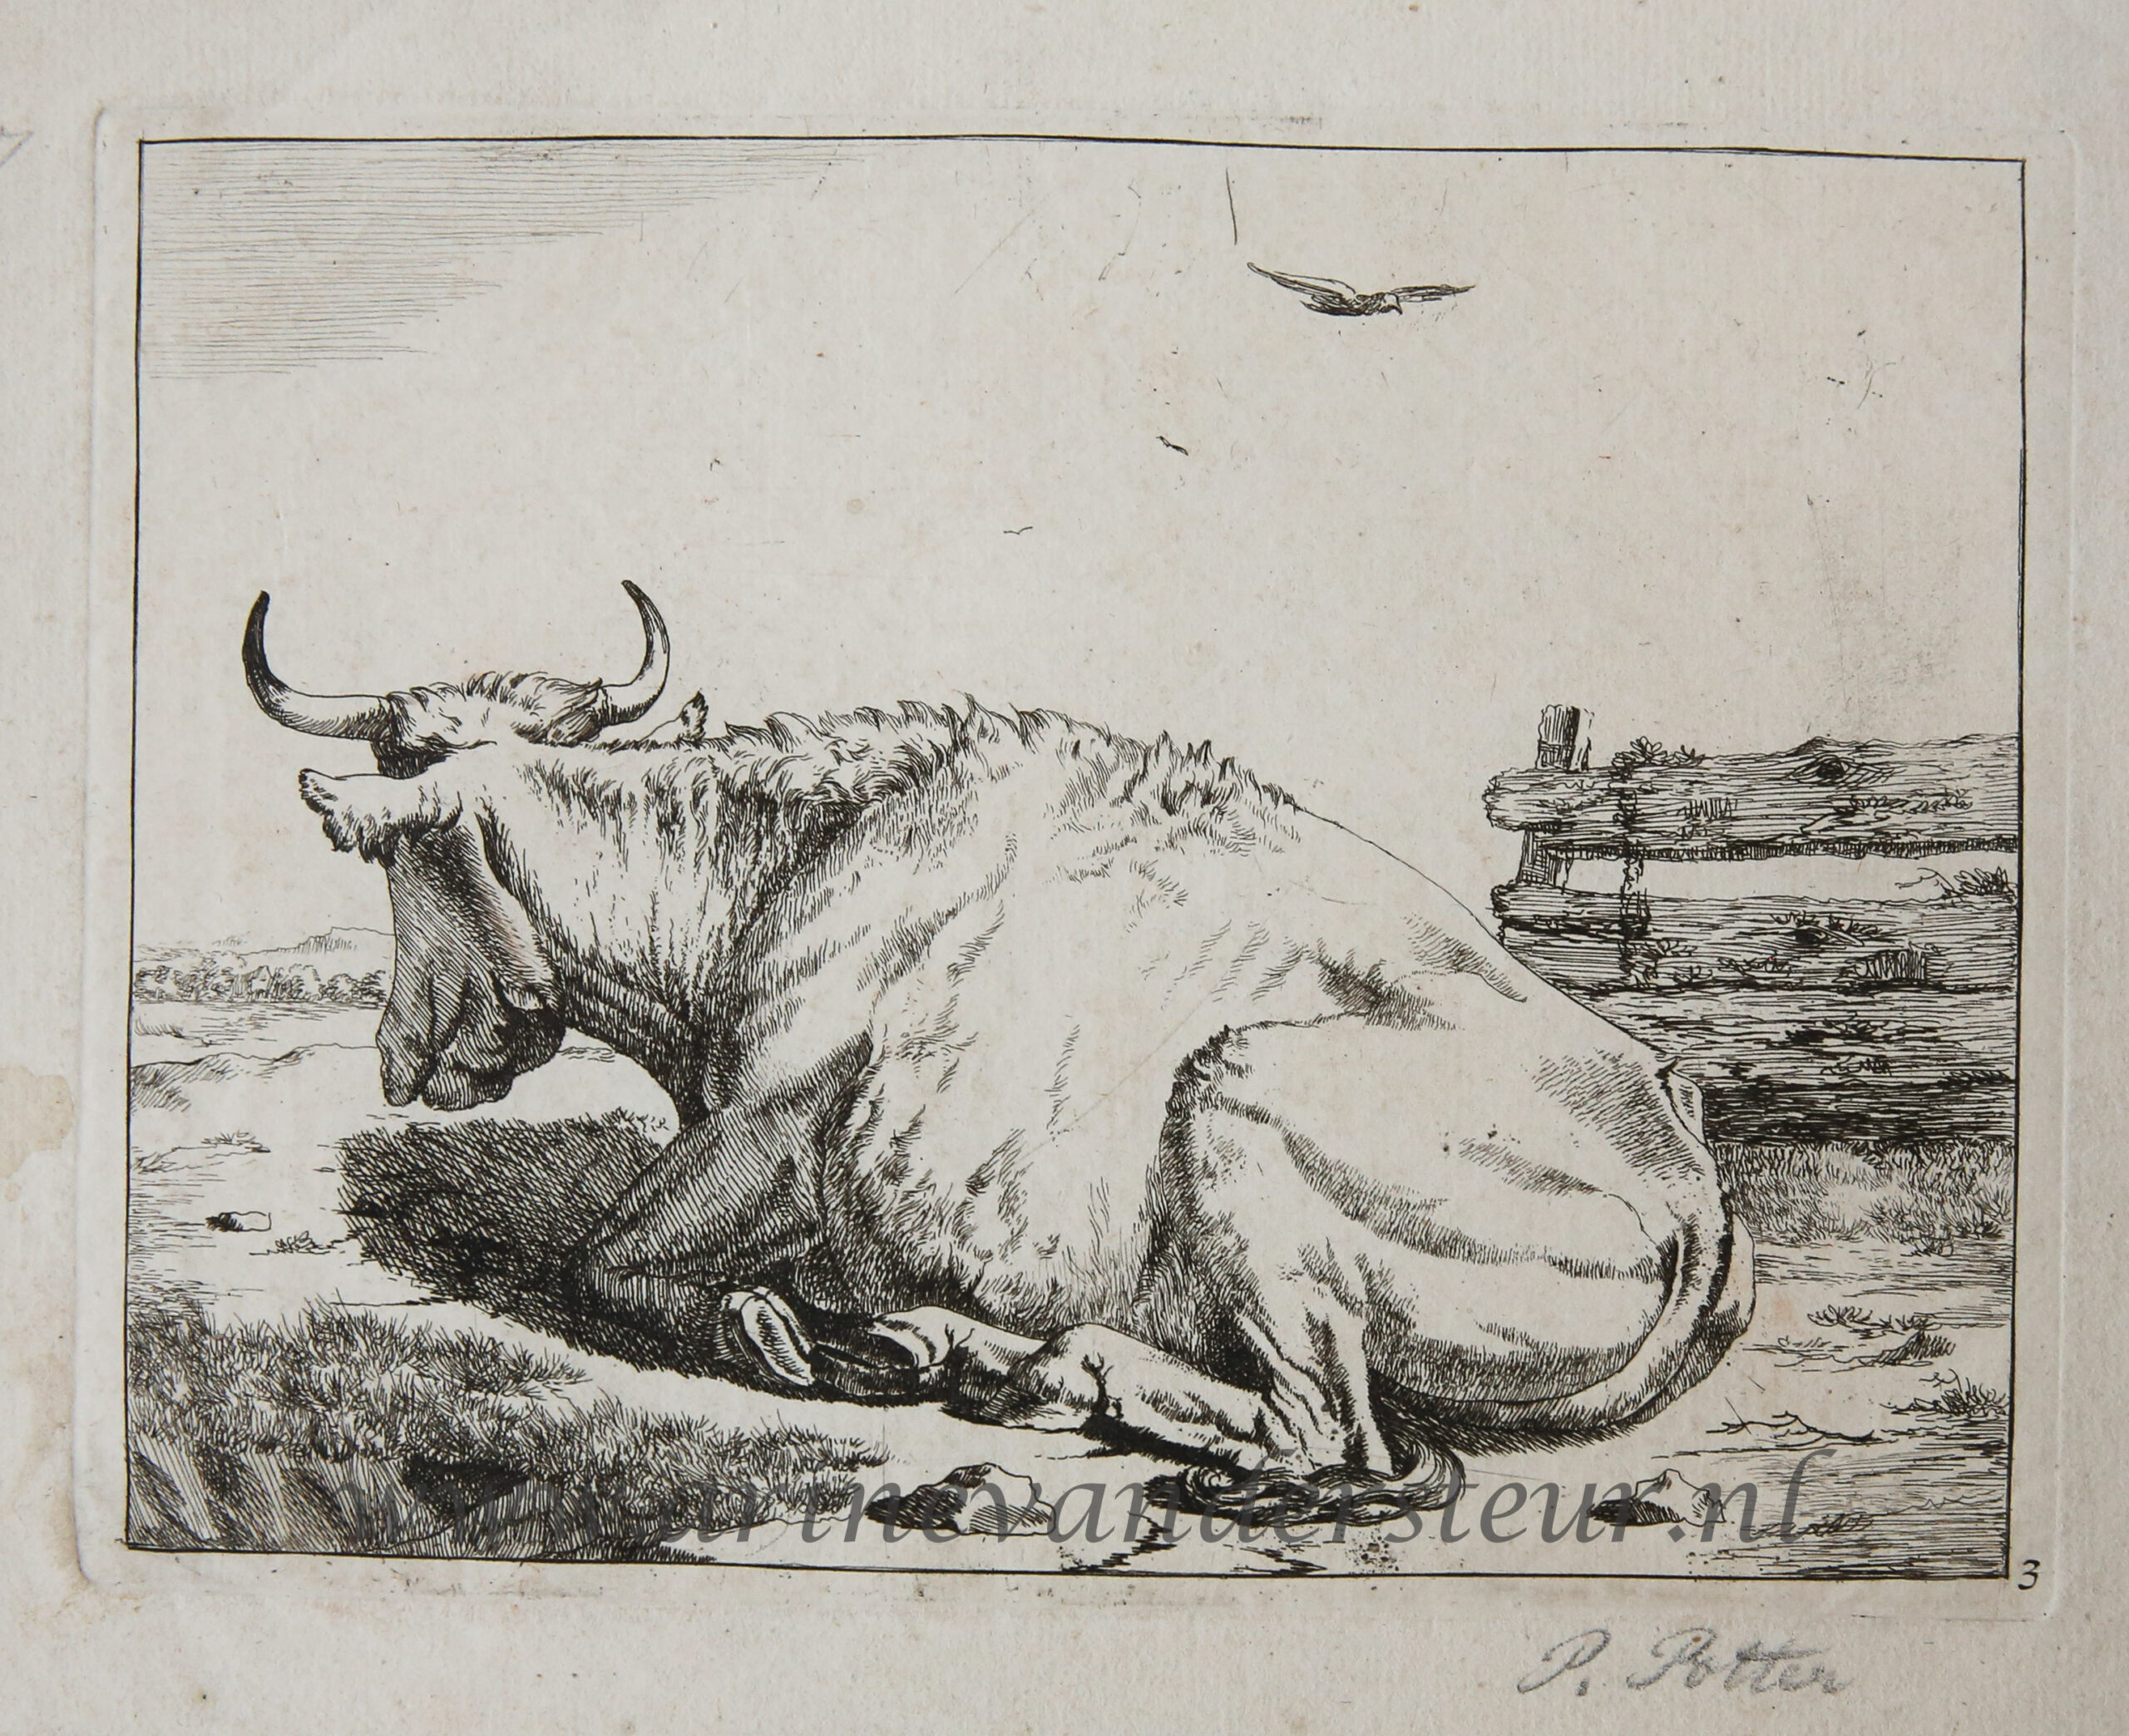 [Original etching, ets] M. de Bye after P. Potter. Laying cow, published 1650-1700.